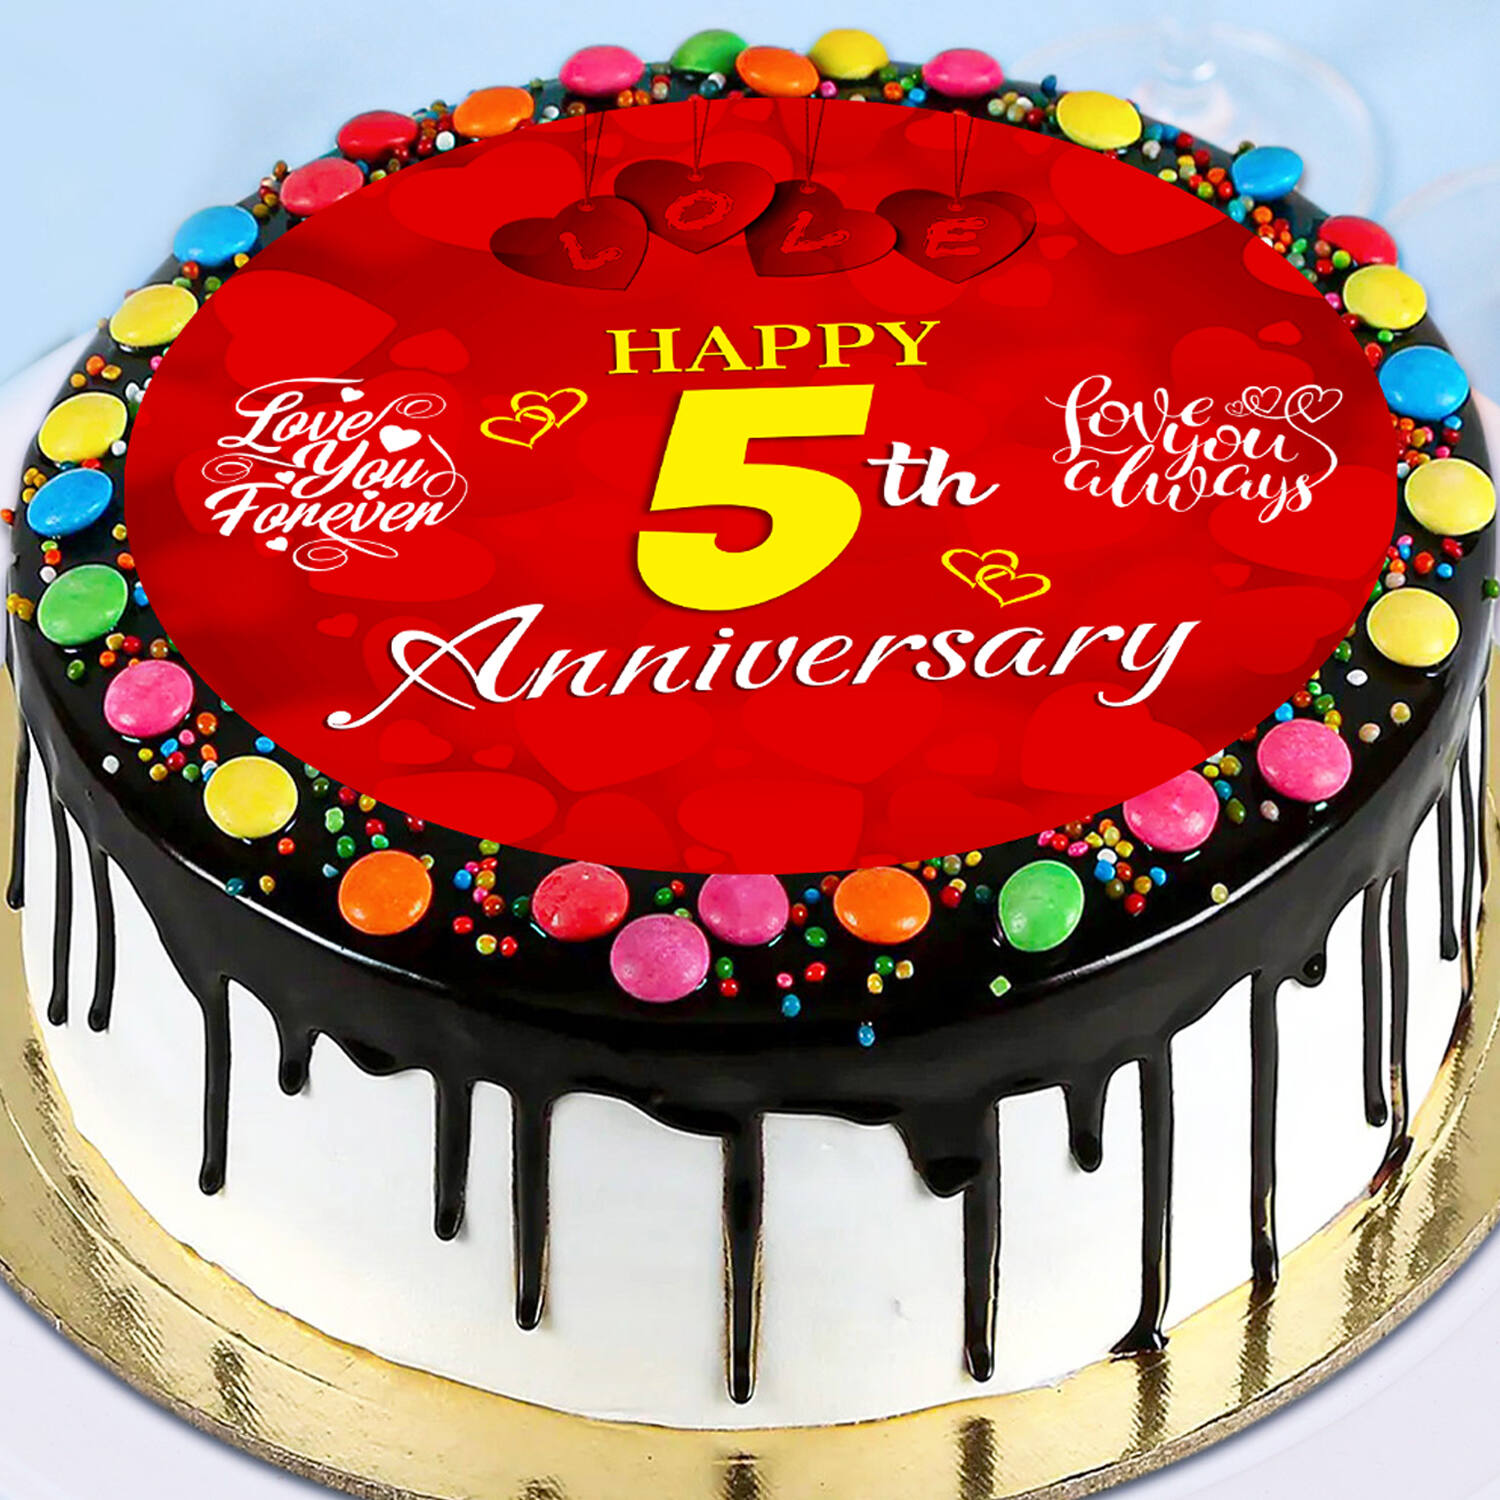 Top 81+ 5th marriage anniversary cake latest - awesomeenglish.edu.vn